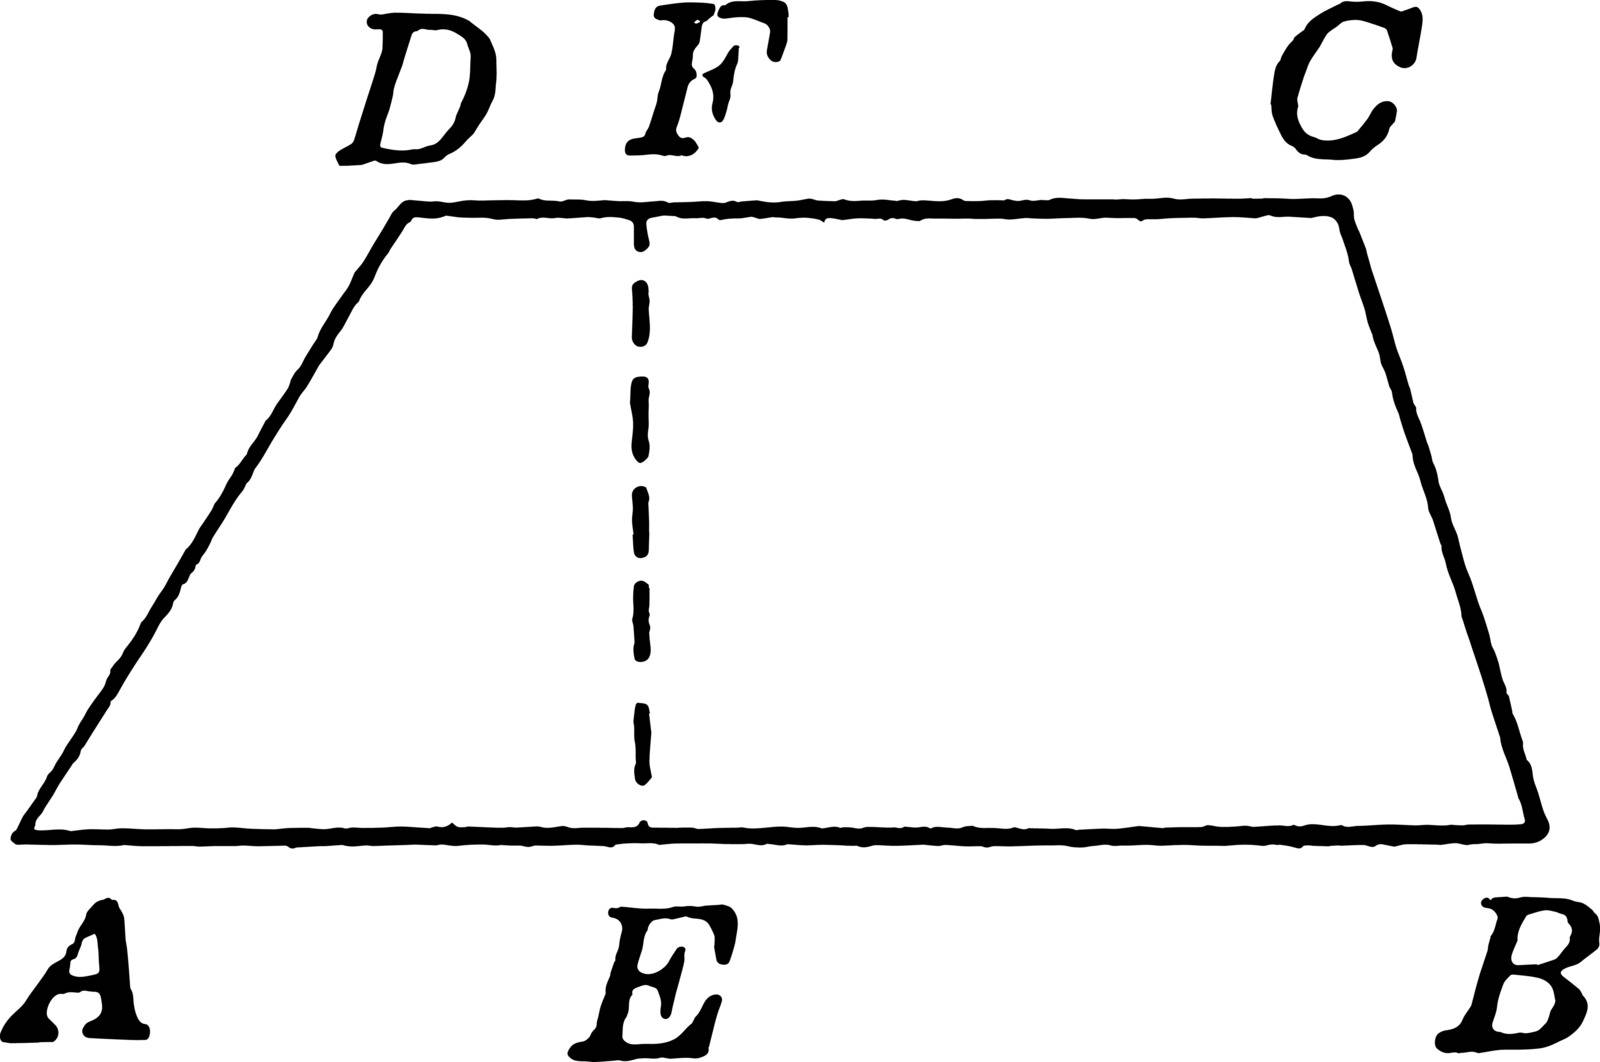 An image showing the ABCD trapezoid. Height labeled with EF dotted line. Quadrilateral that has two and only two parallel sides, vintage line drawing or engraving illustration.